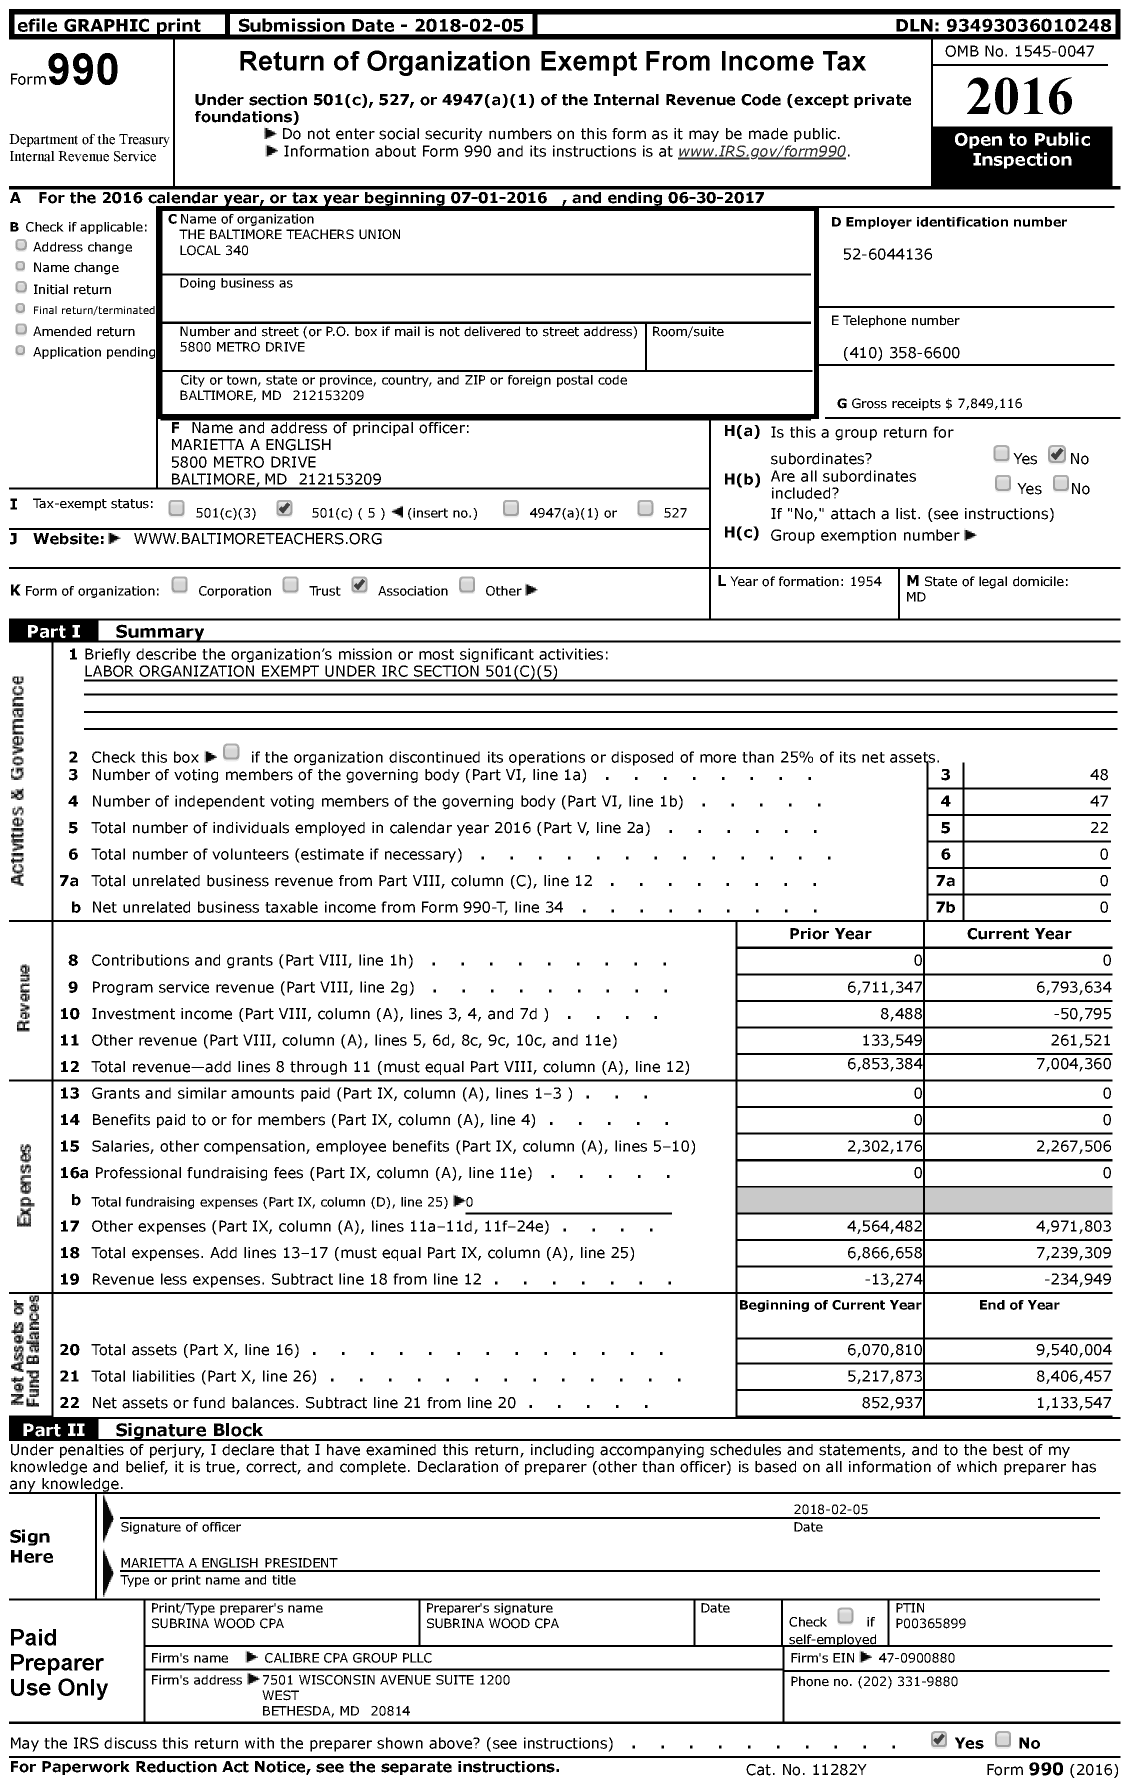 Image of first page of 2016 Form 990 for American Federation of Teachers - 0340 Baltimore Teachers Union